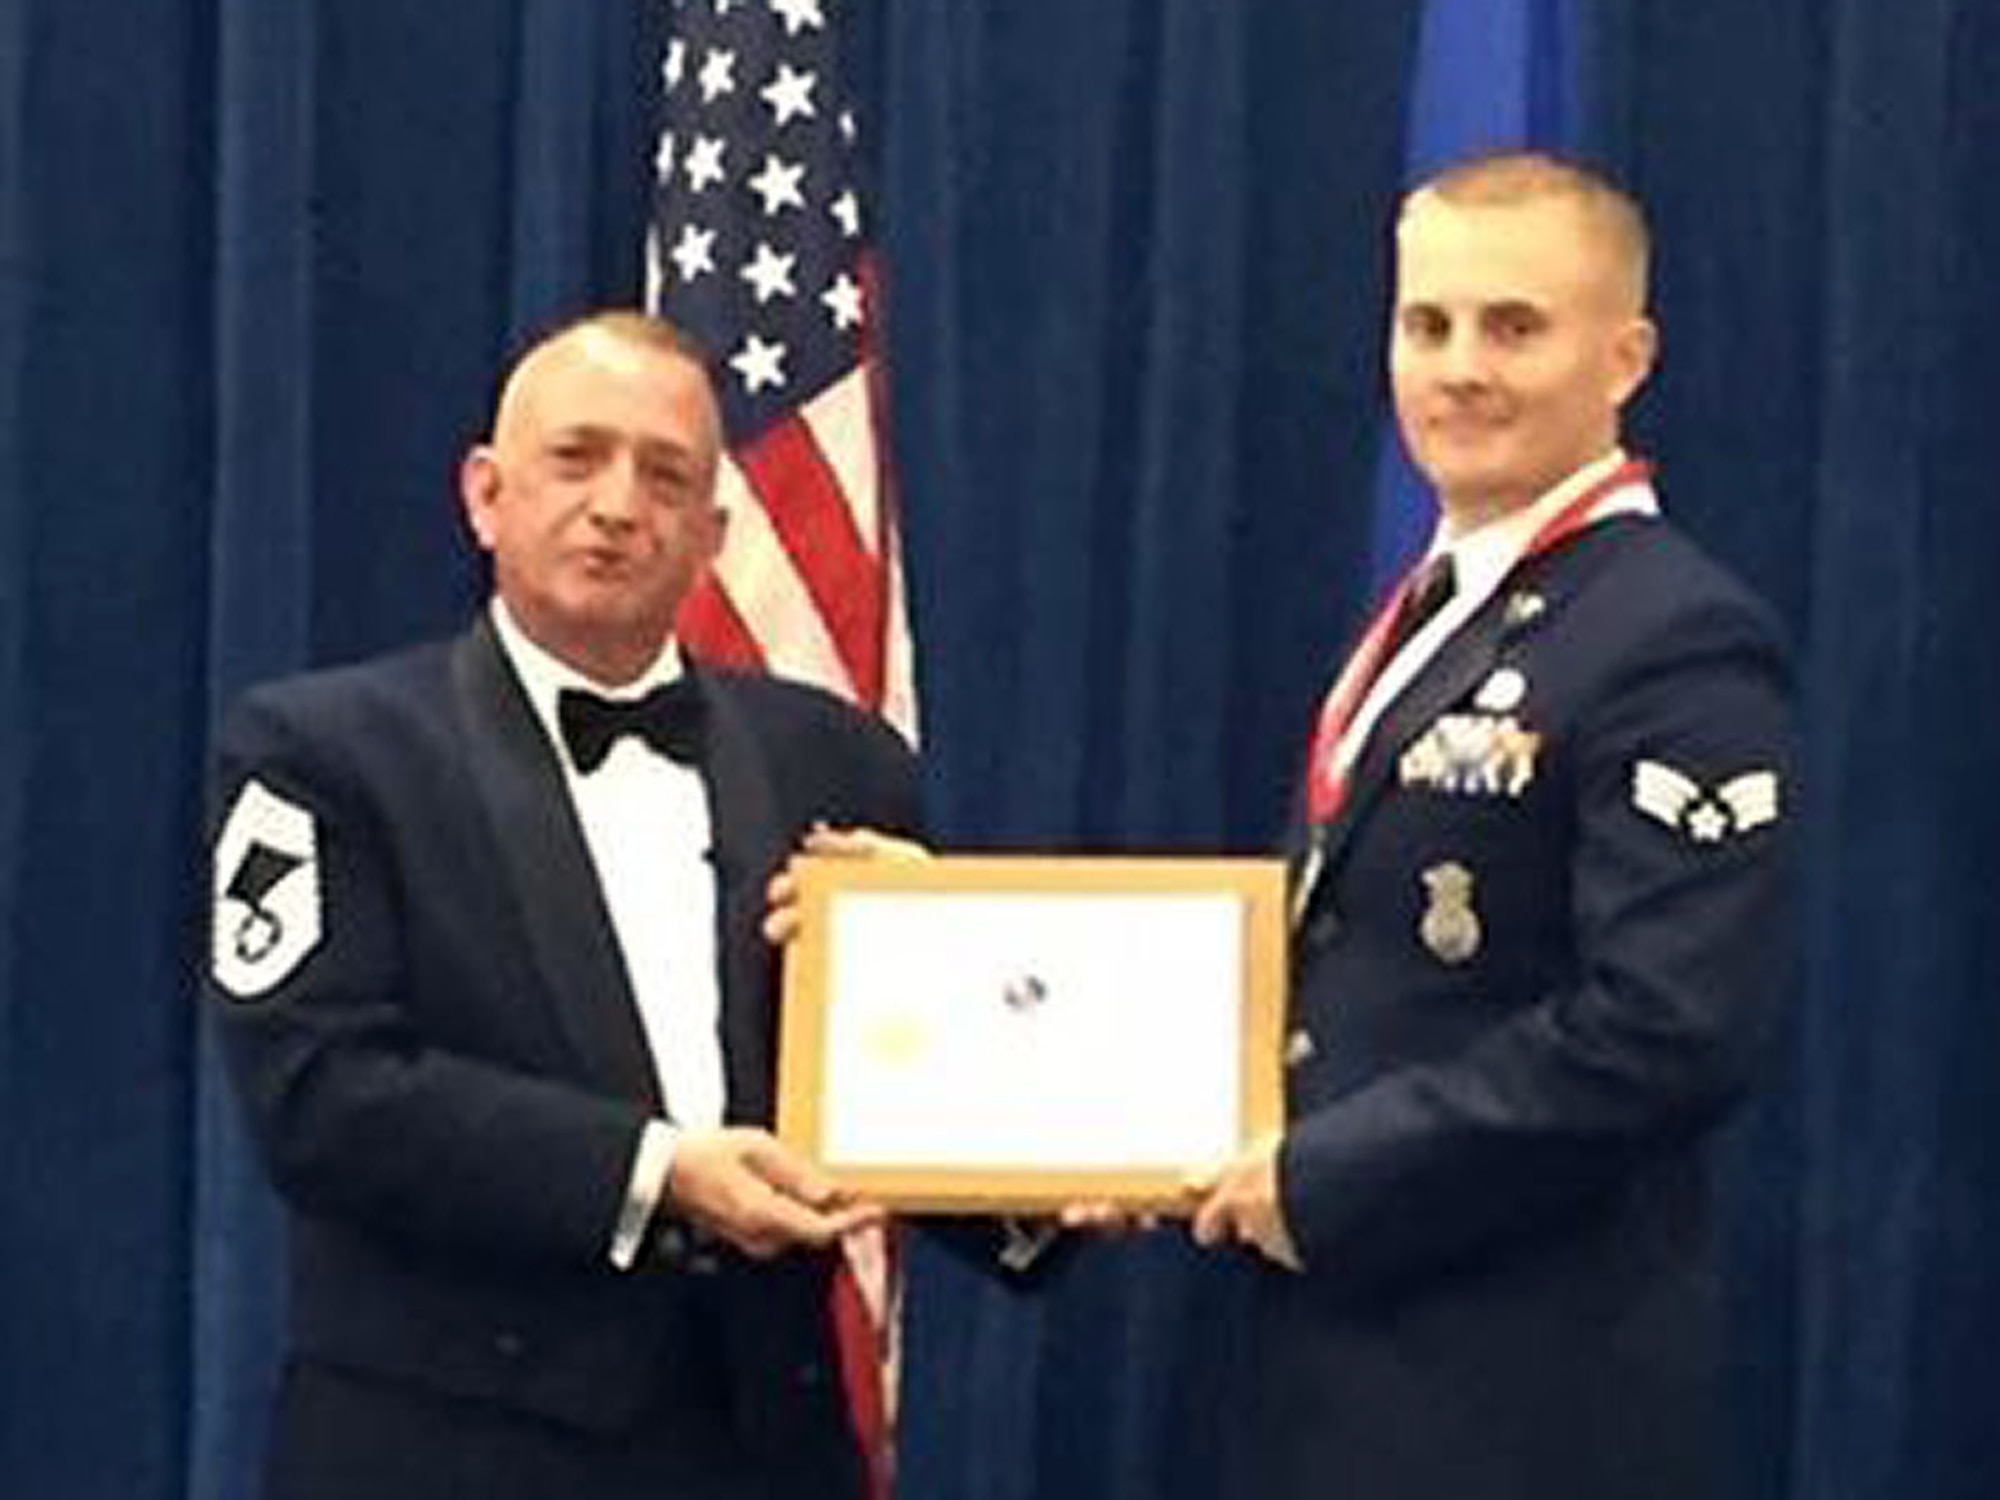 Chief Master Sgt. Andrew Traugot, chief of the Media and Engagement Division at the I.G. Brown Training and Education Center, presents 120th Airlift Wing Senior Airman Jedidiah Polk with a Distinguished Graduate Award during the Satellite Airman Leadership School graduation ceremony held at McGee-Tyson Air National Guard Base June 30, 2016. (U.S. Air National Guard photo by Chief Master Sgt. Steven Lynch)